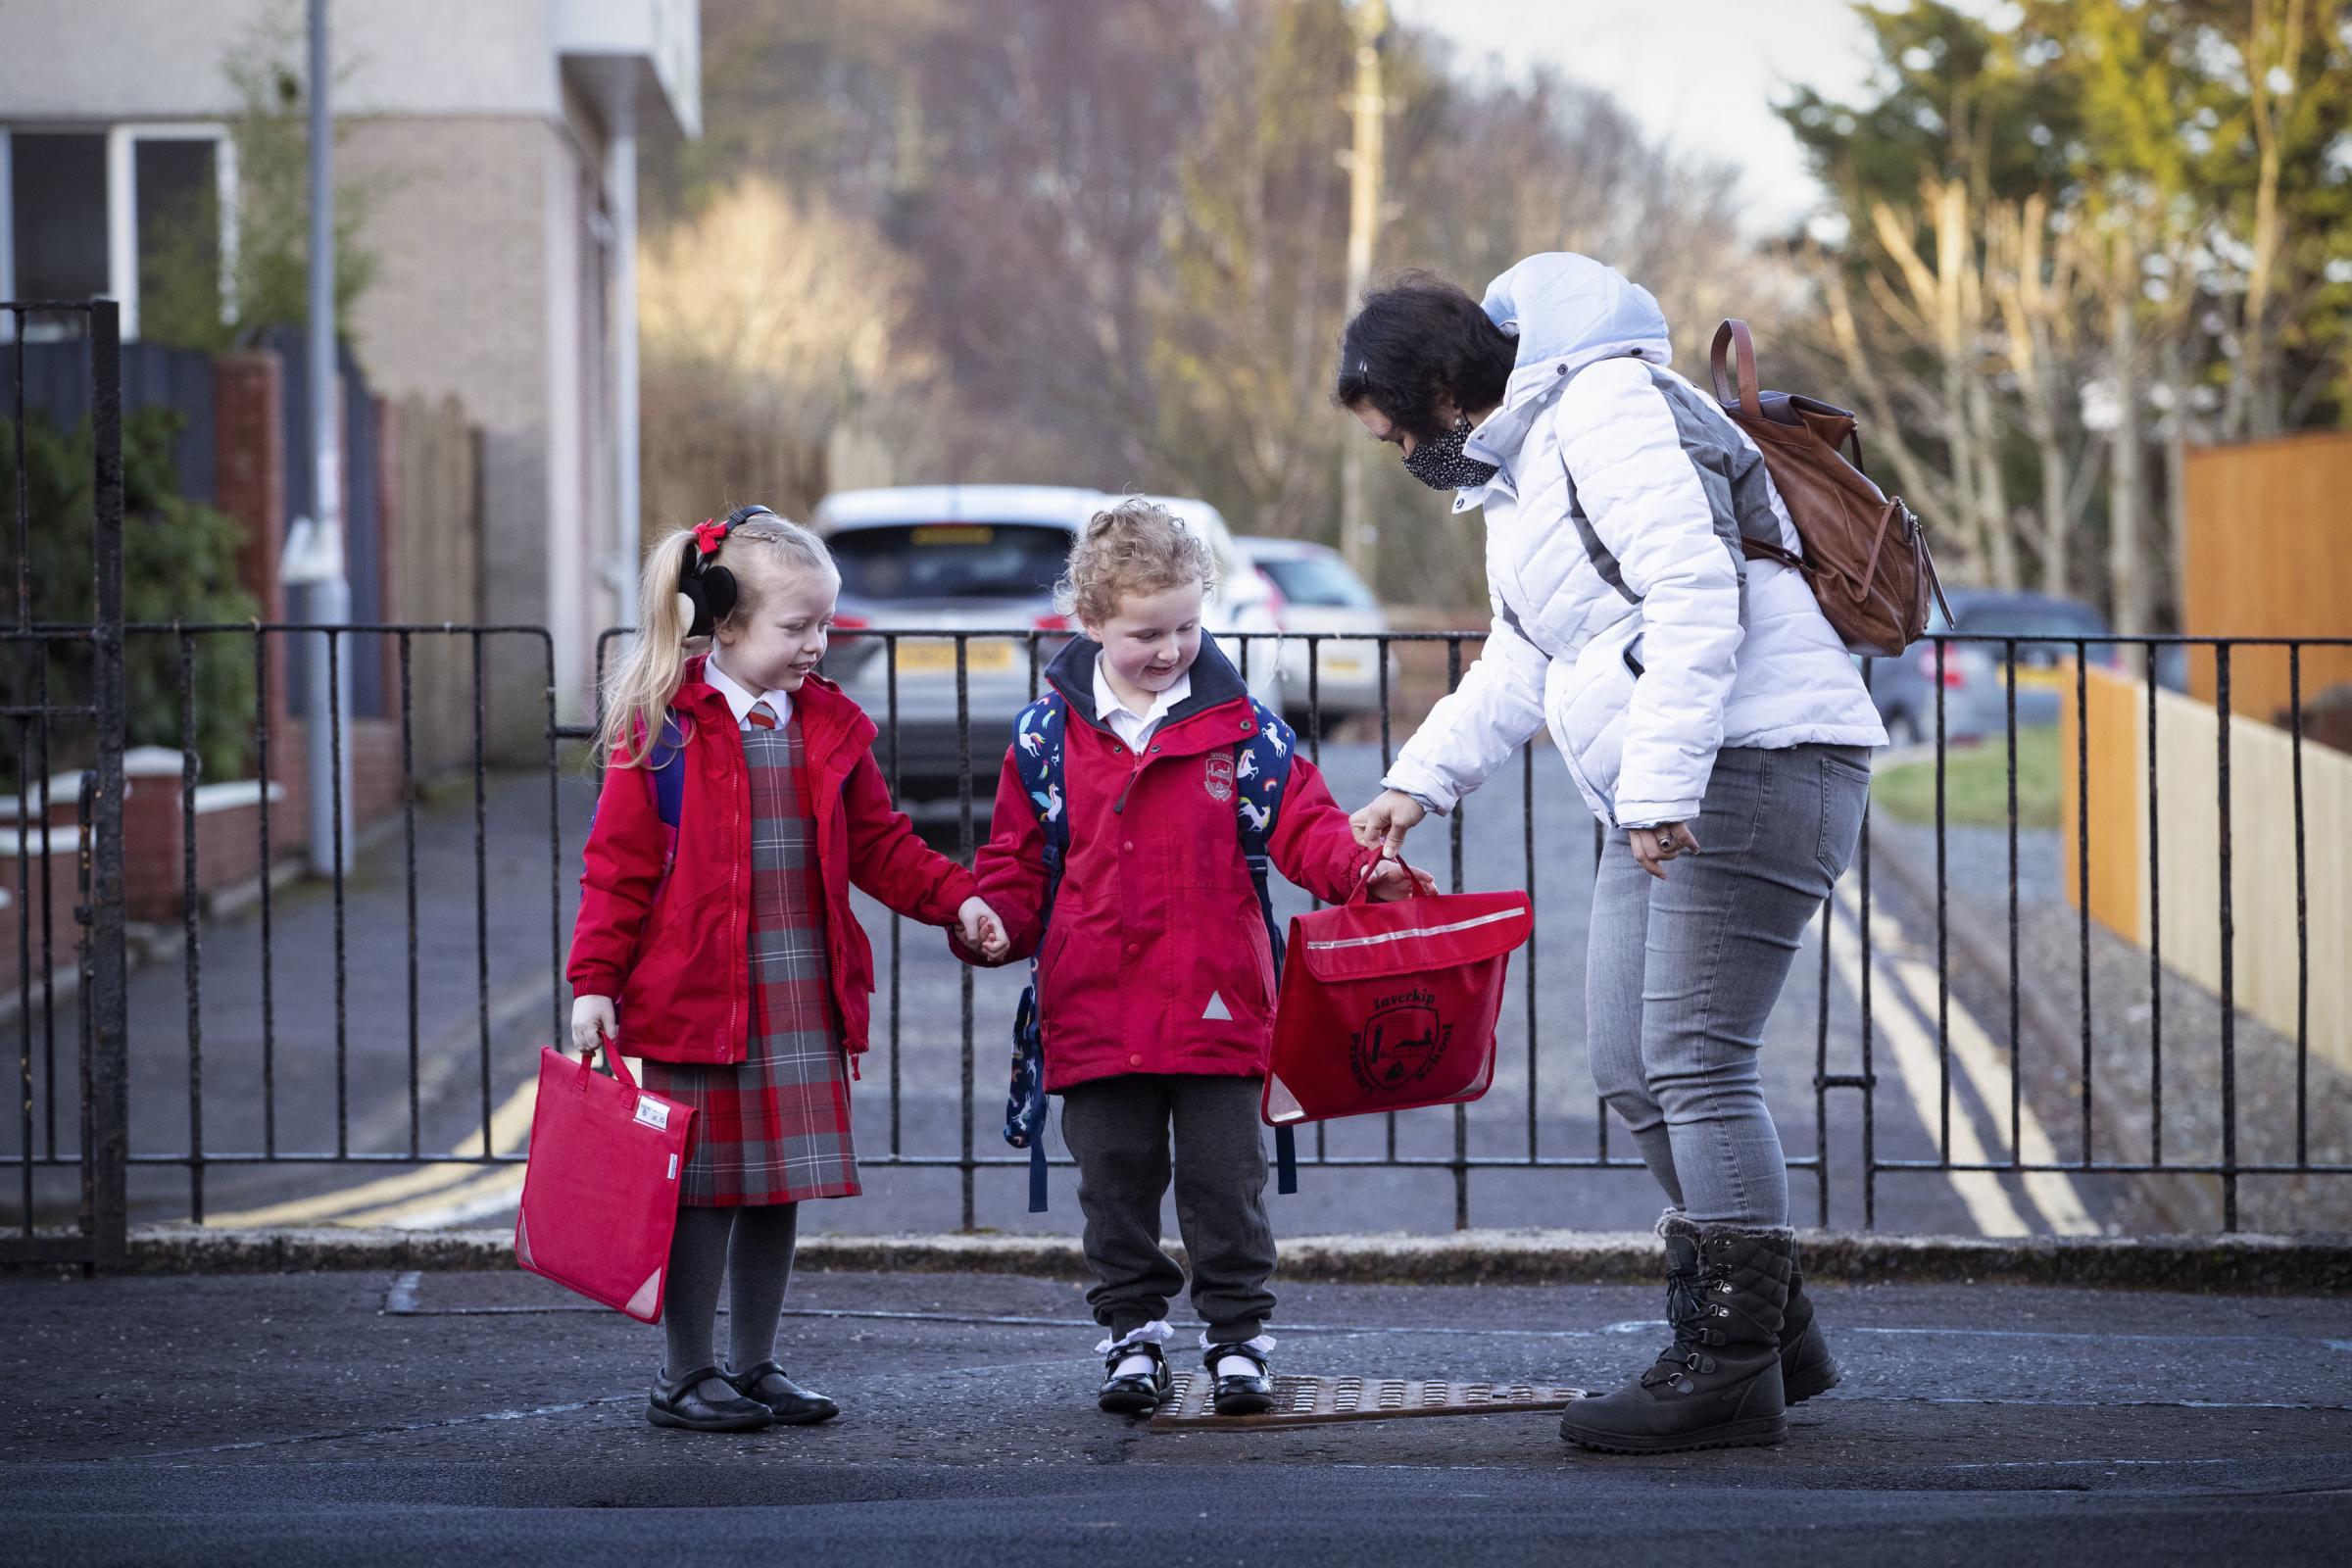 P1 pupils Grace Lee (left) and classmate Grace McKeeman, both aged 5, arrive for their first day back at Inverkip Primary School in Greenock as Scotlands youngest pupils return to the classroom as part of a phased reopening of schools. Picture date: Mon